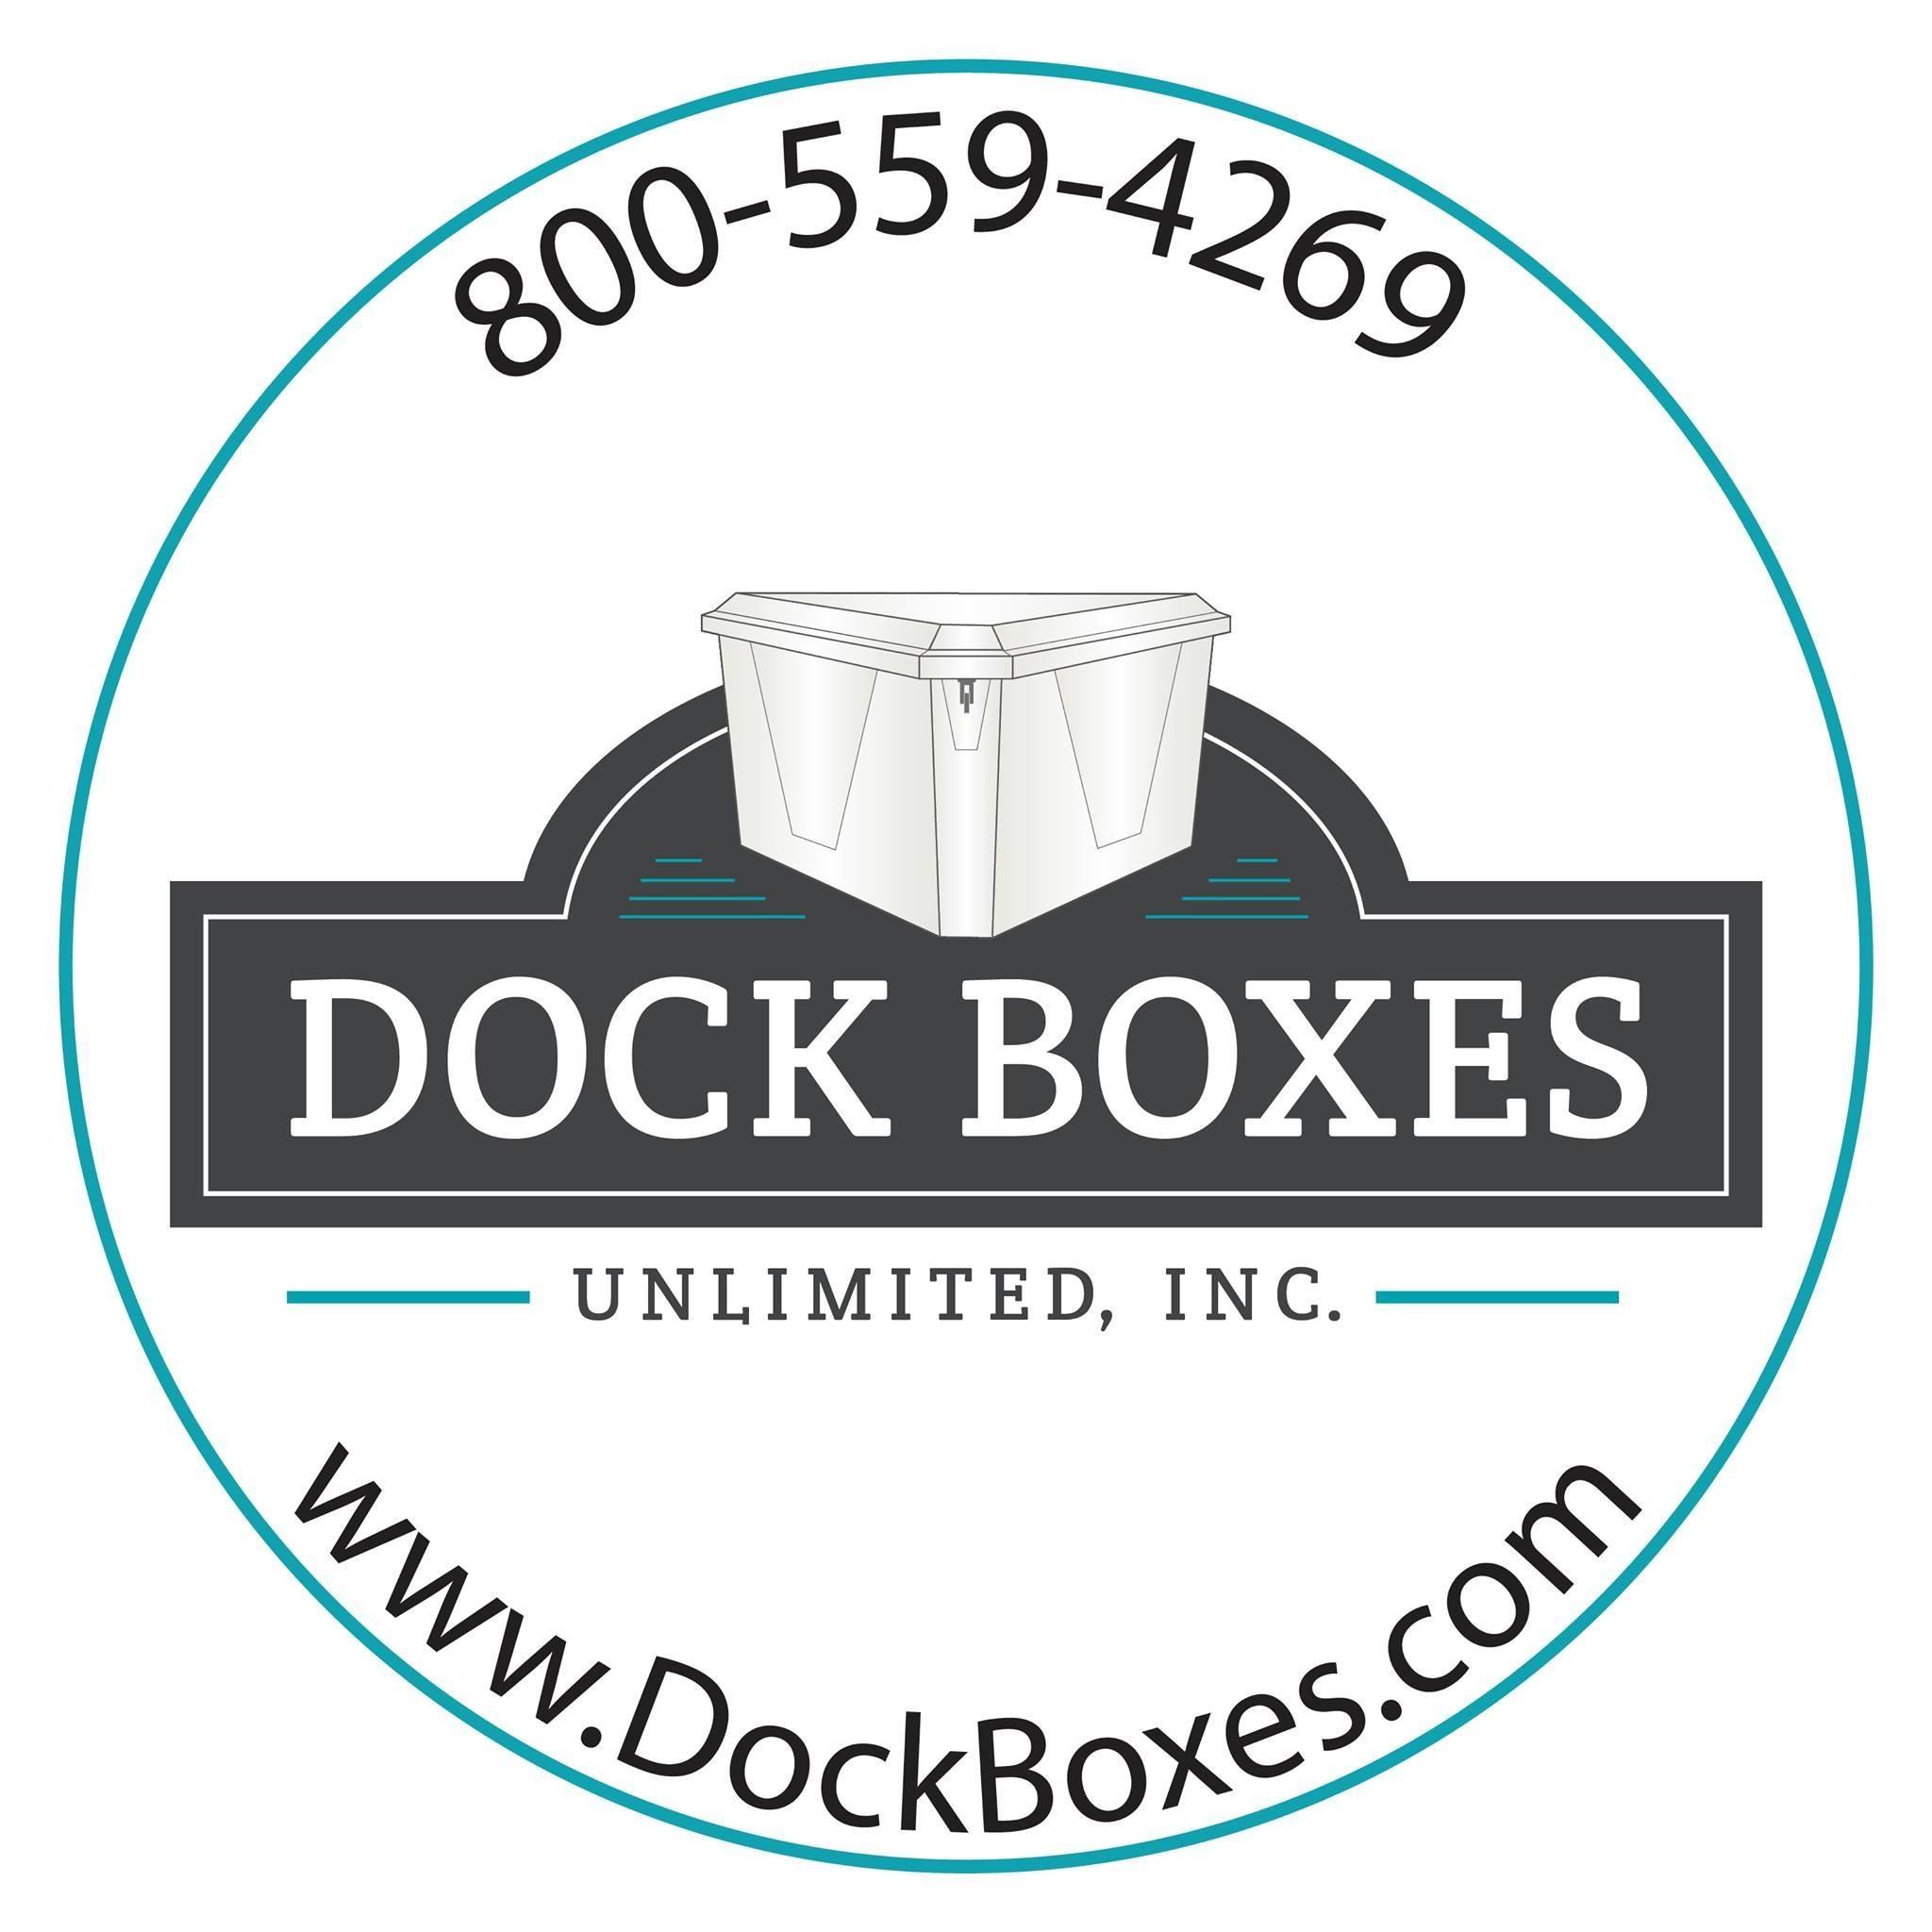 Dock Boxes Unlimited, Inc. - Irving, TX 75038 - (800)559-4269 | ShowMeLocal.com